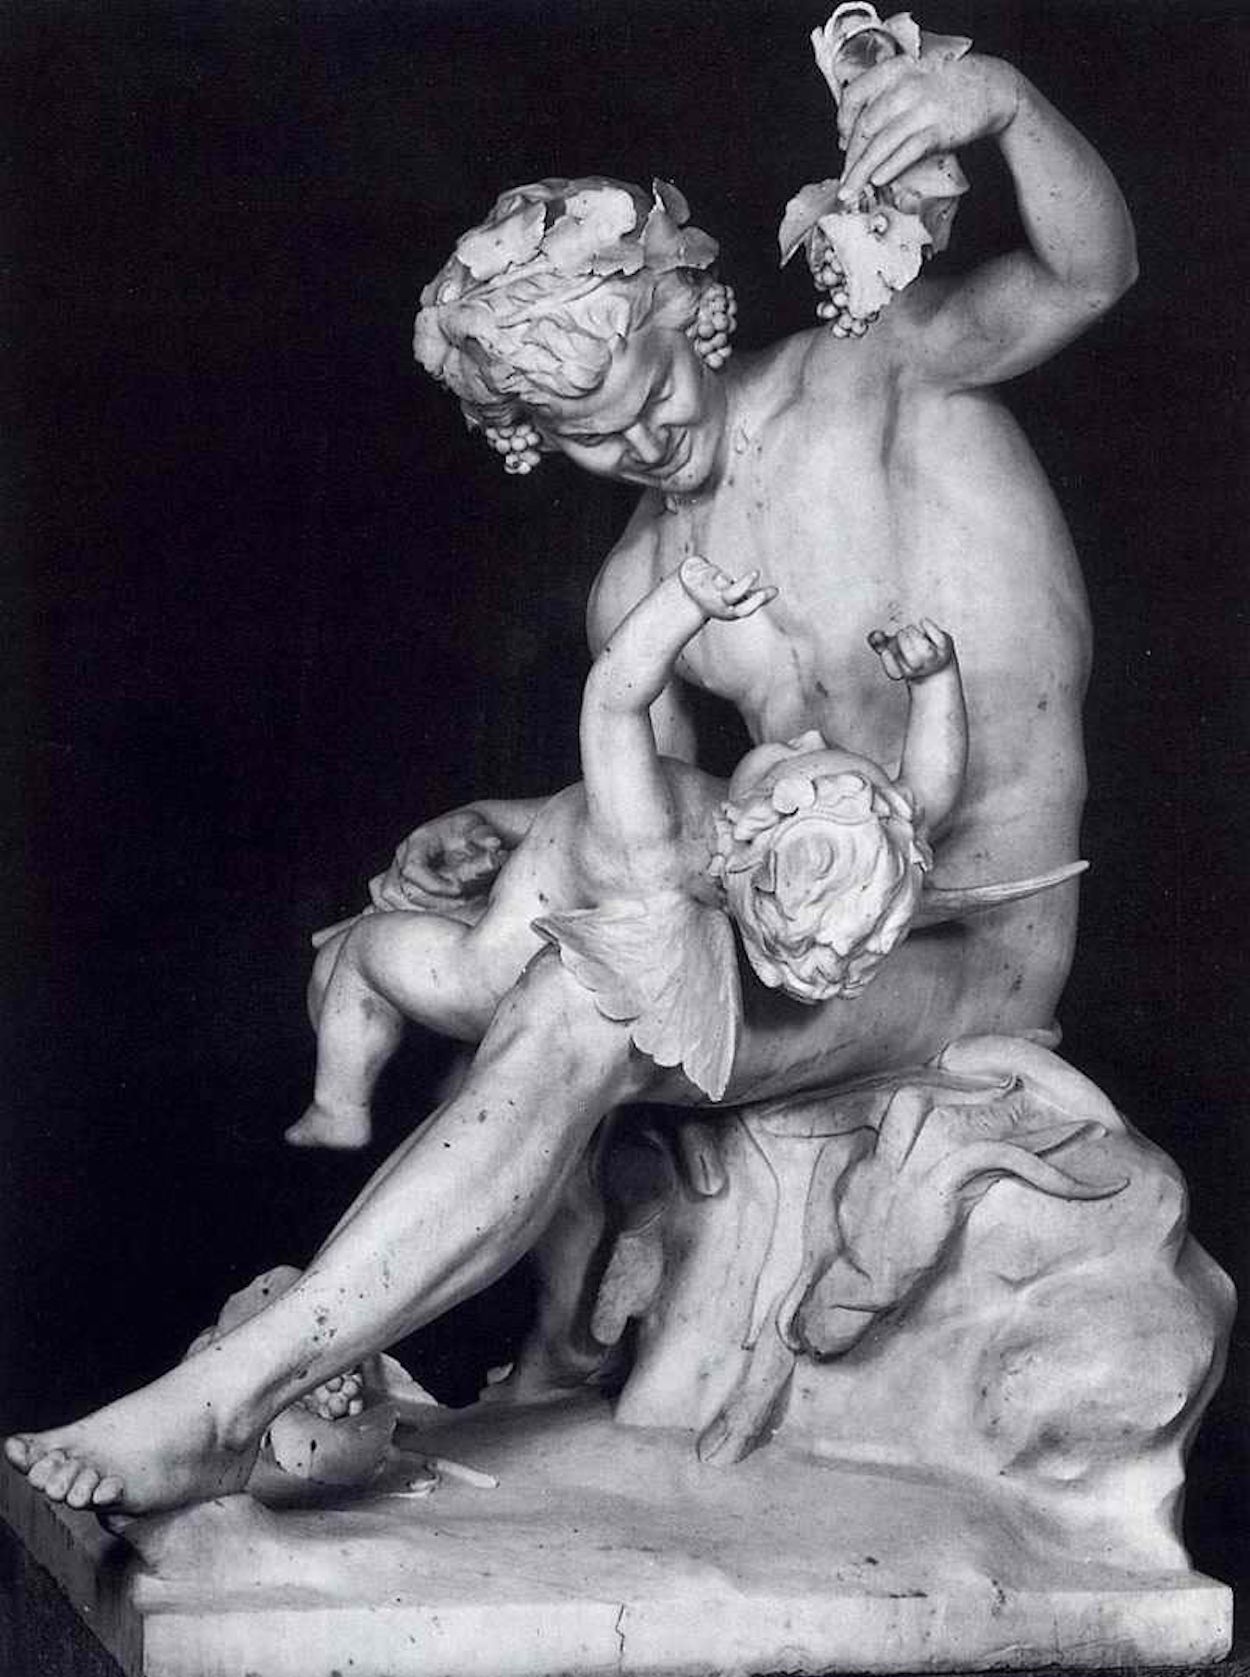 Satyr Playing With Eros by Yannoulis Chalepas - 1875-1877 - 135cm x 105cm x 75cm National Glyptotheque